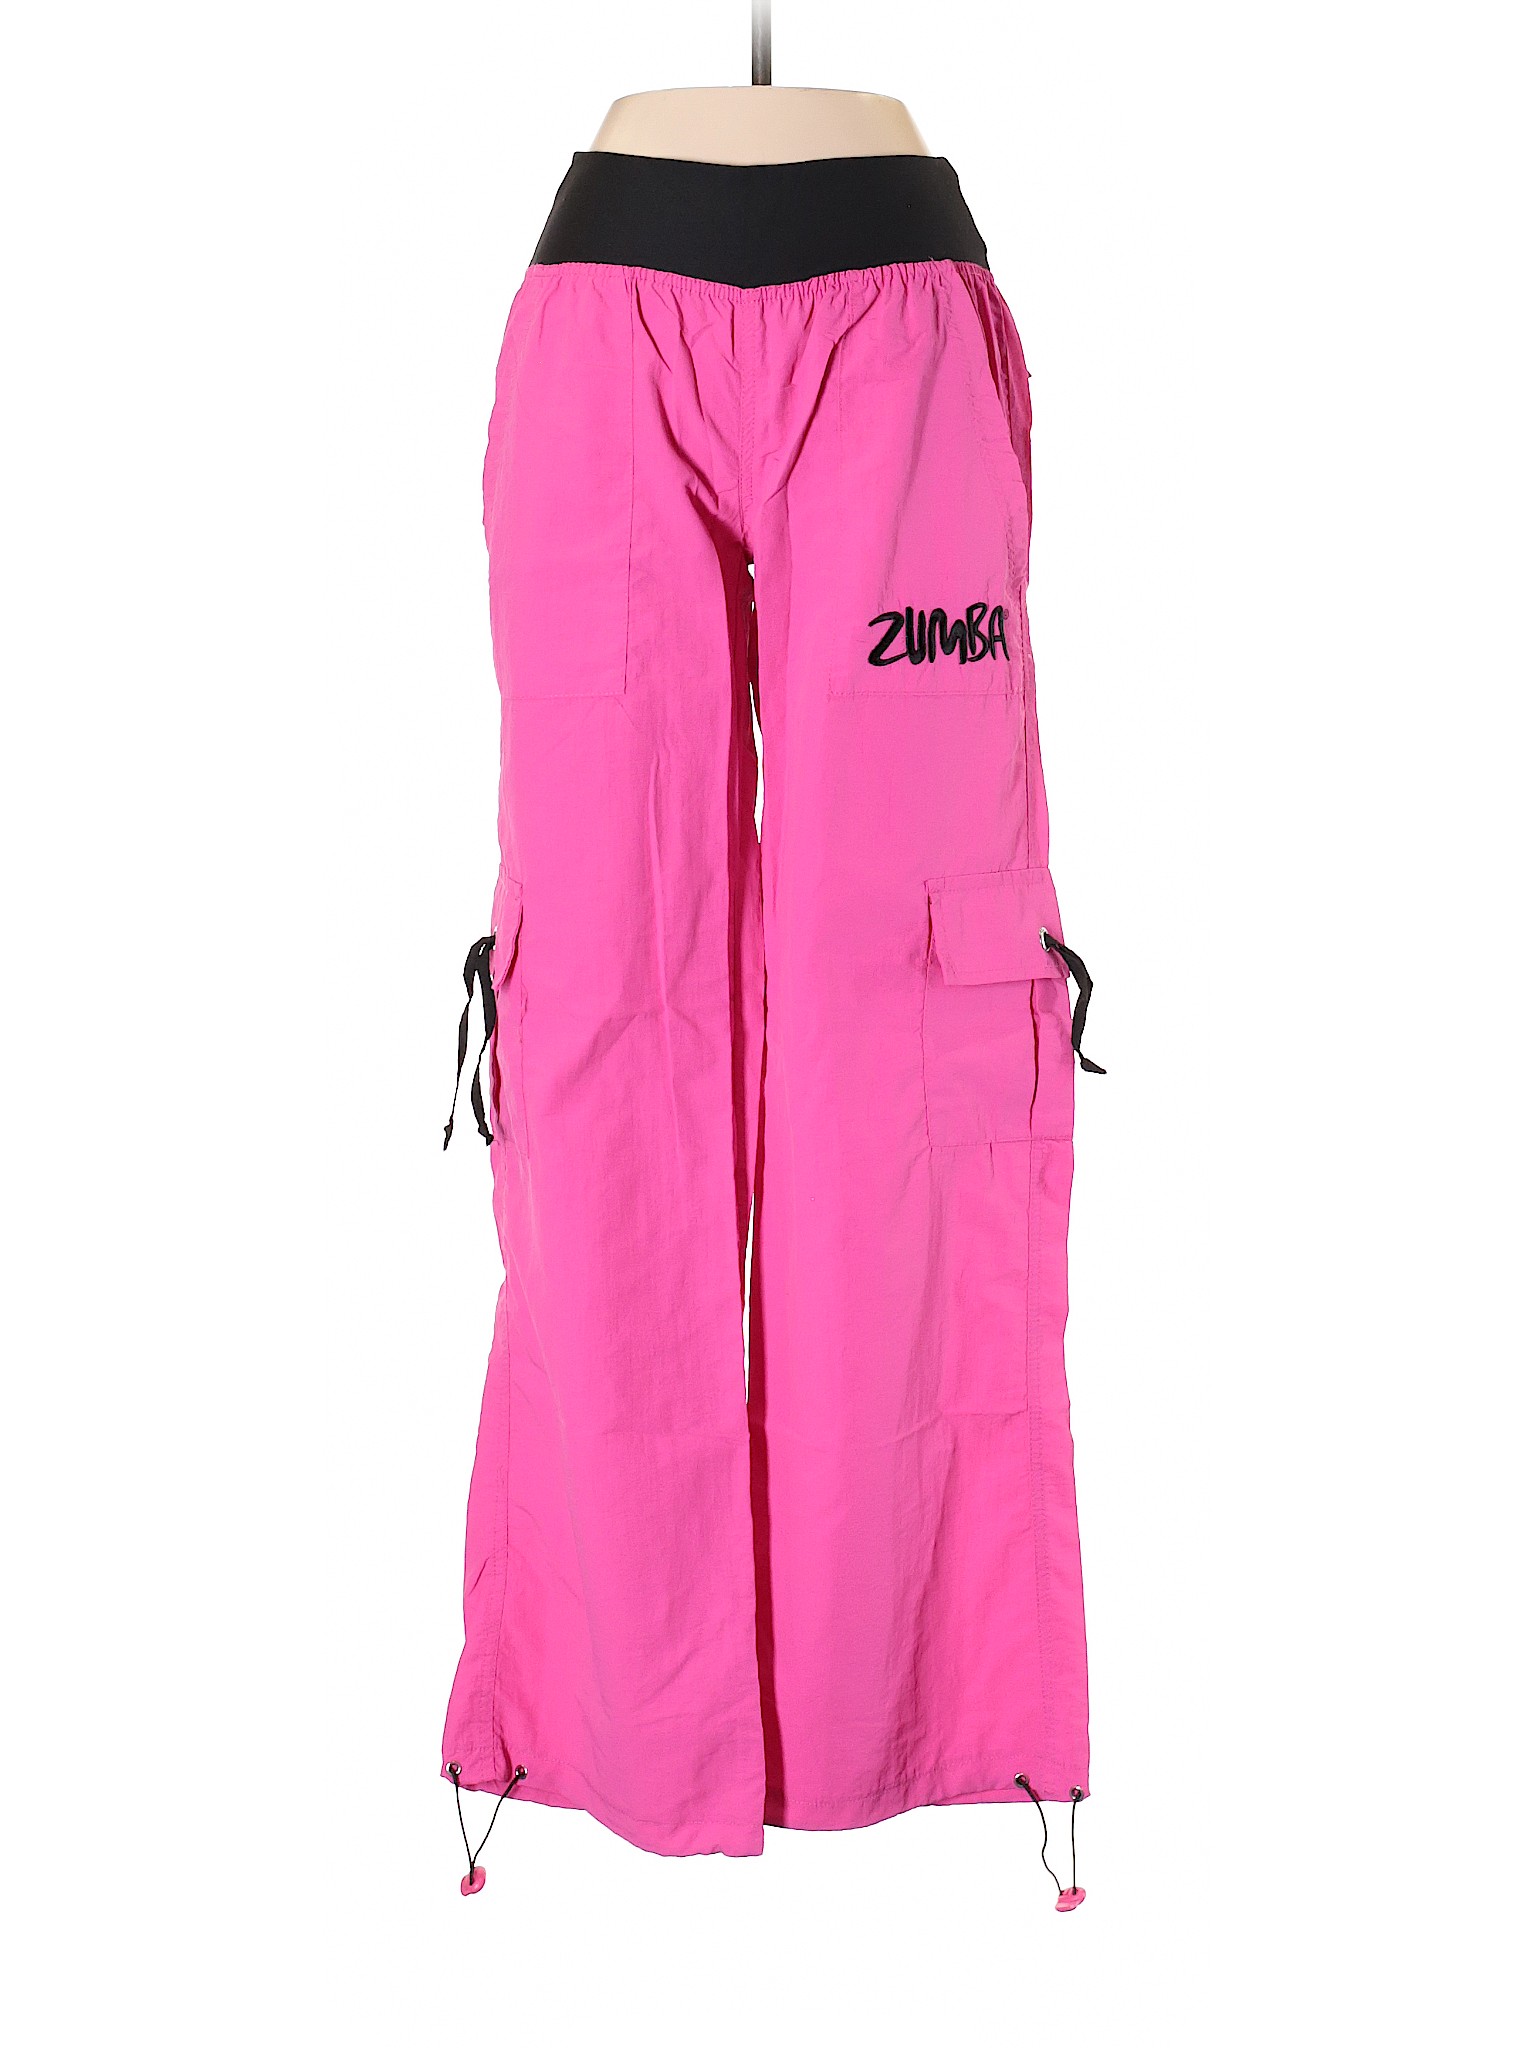 Zumba Wear Solid Pink Cargo Pants Size S - 64% off